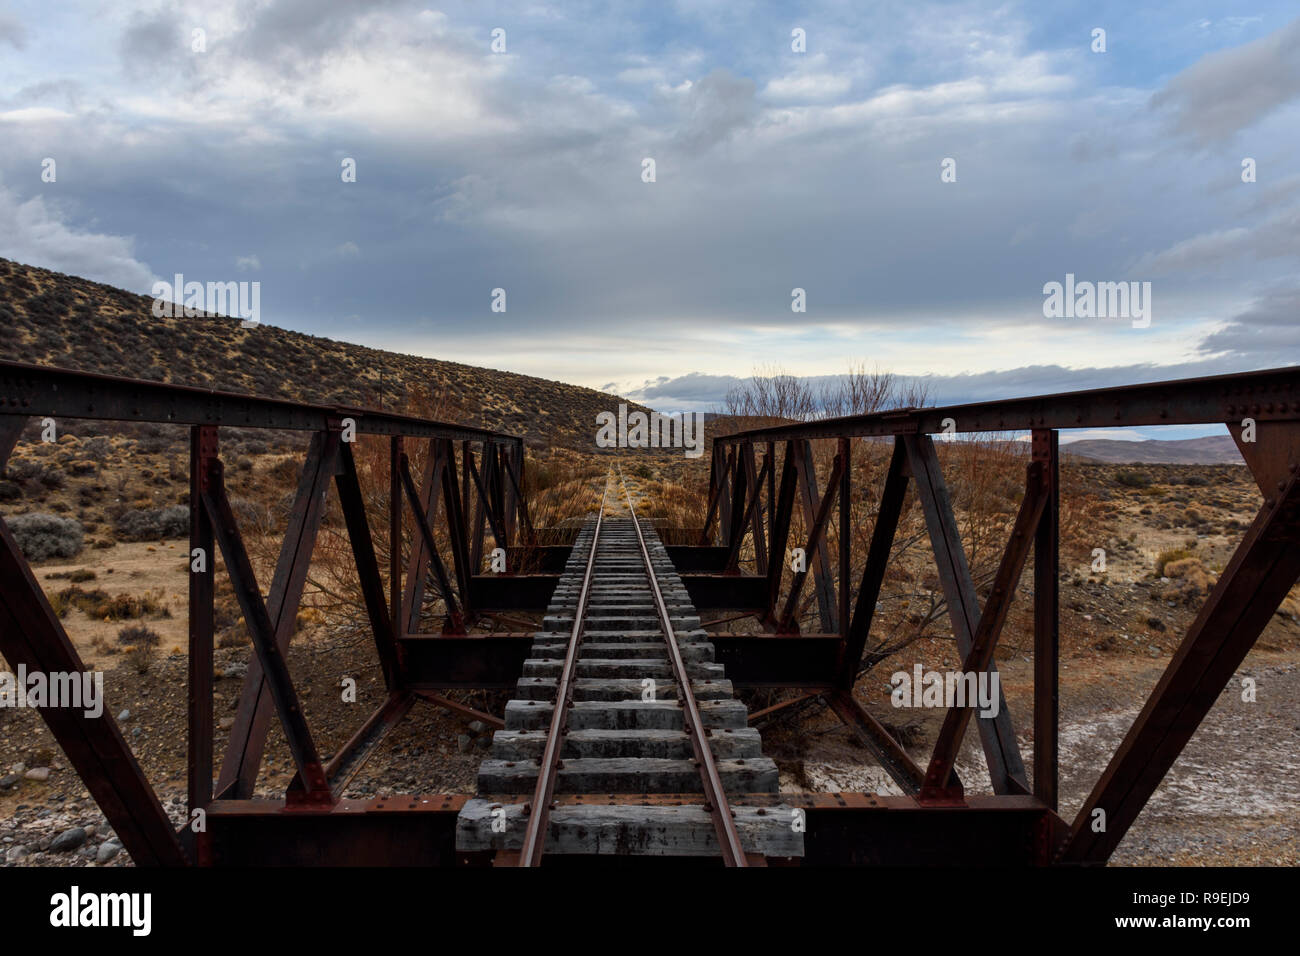 Old Patagonian Express Railway in a remote location in Patagonia, Argentina Stock Photo